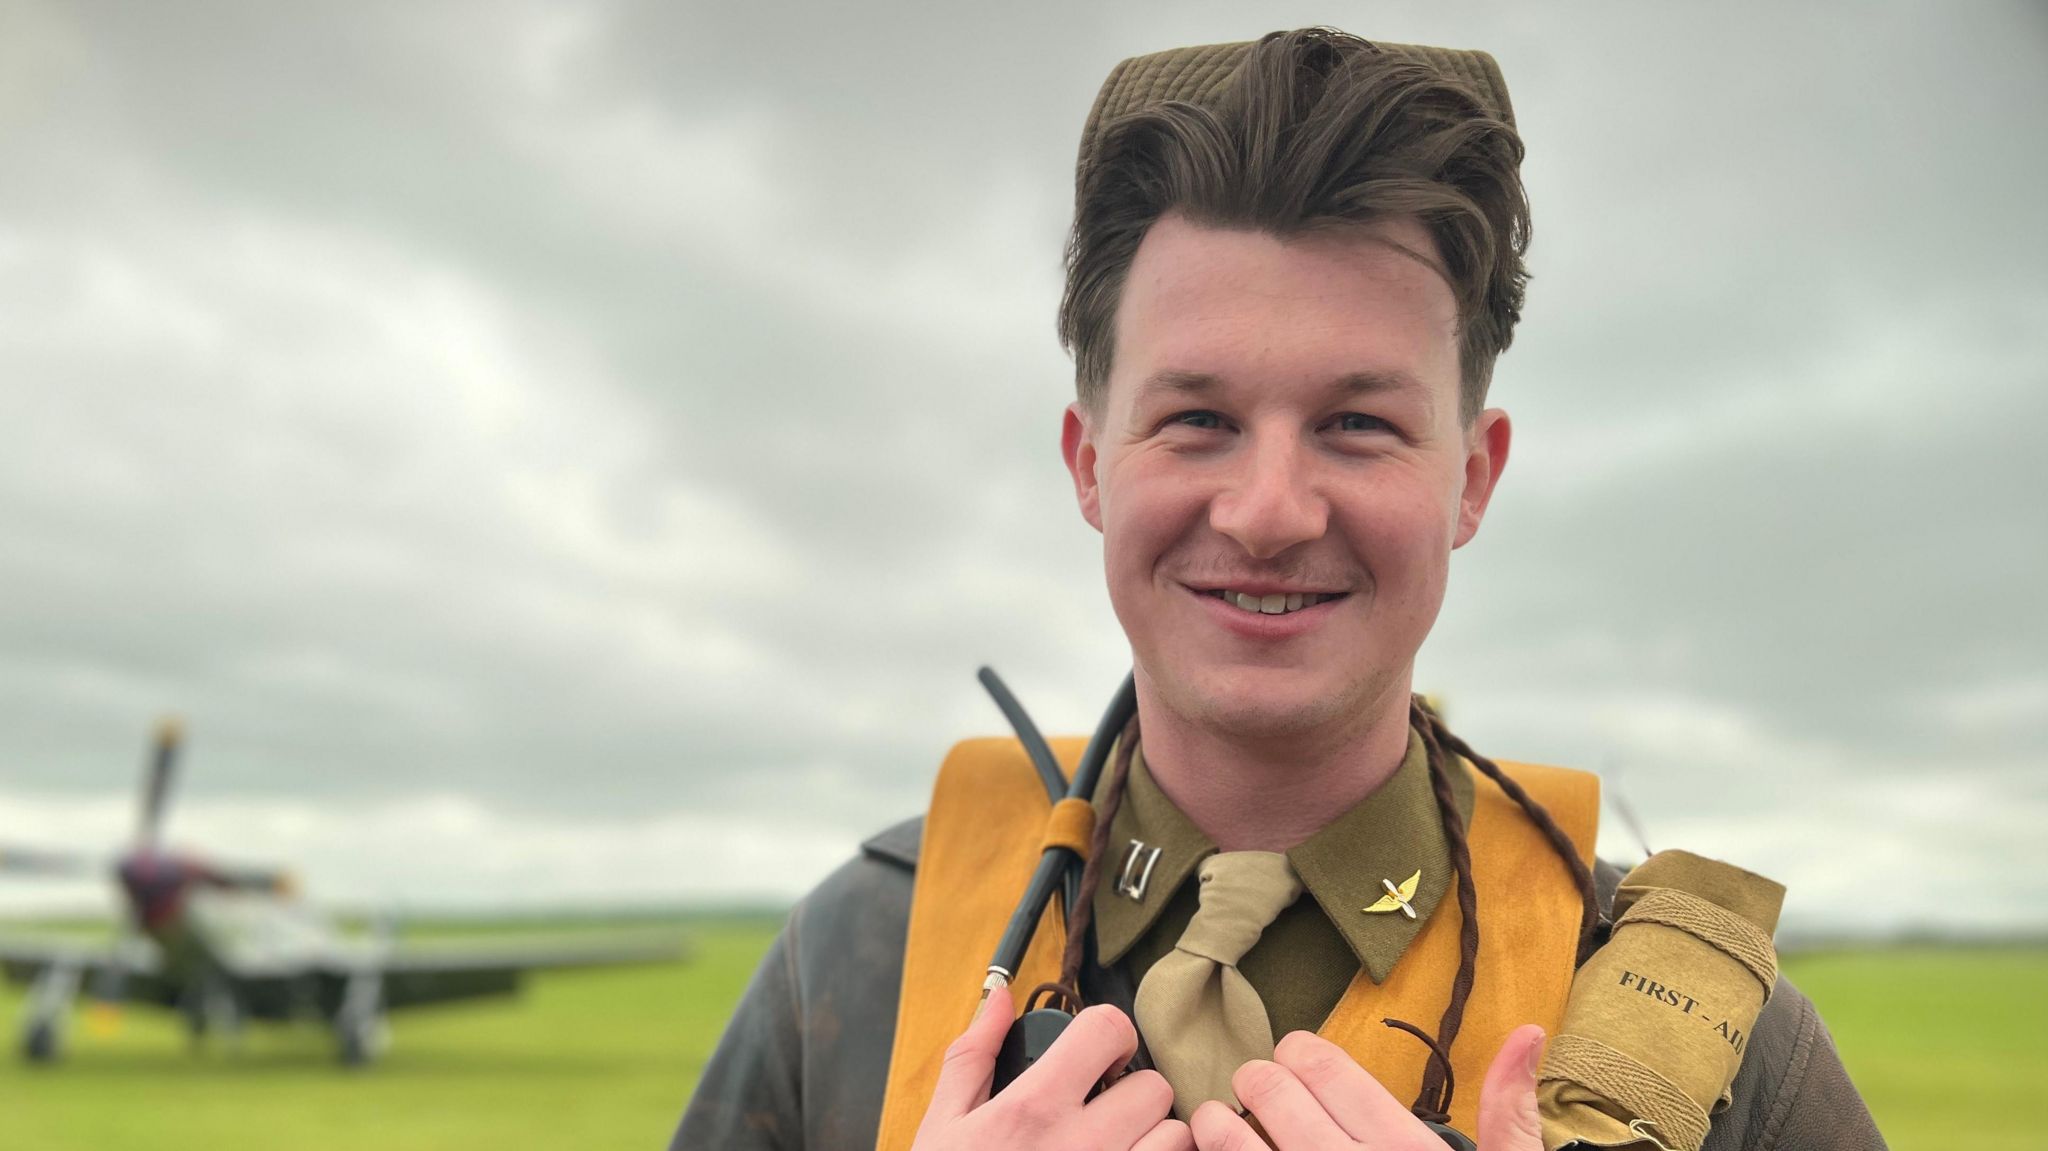 Jack McCombie dressed as a World War Two US airman at Duxford 